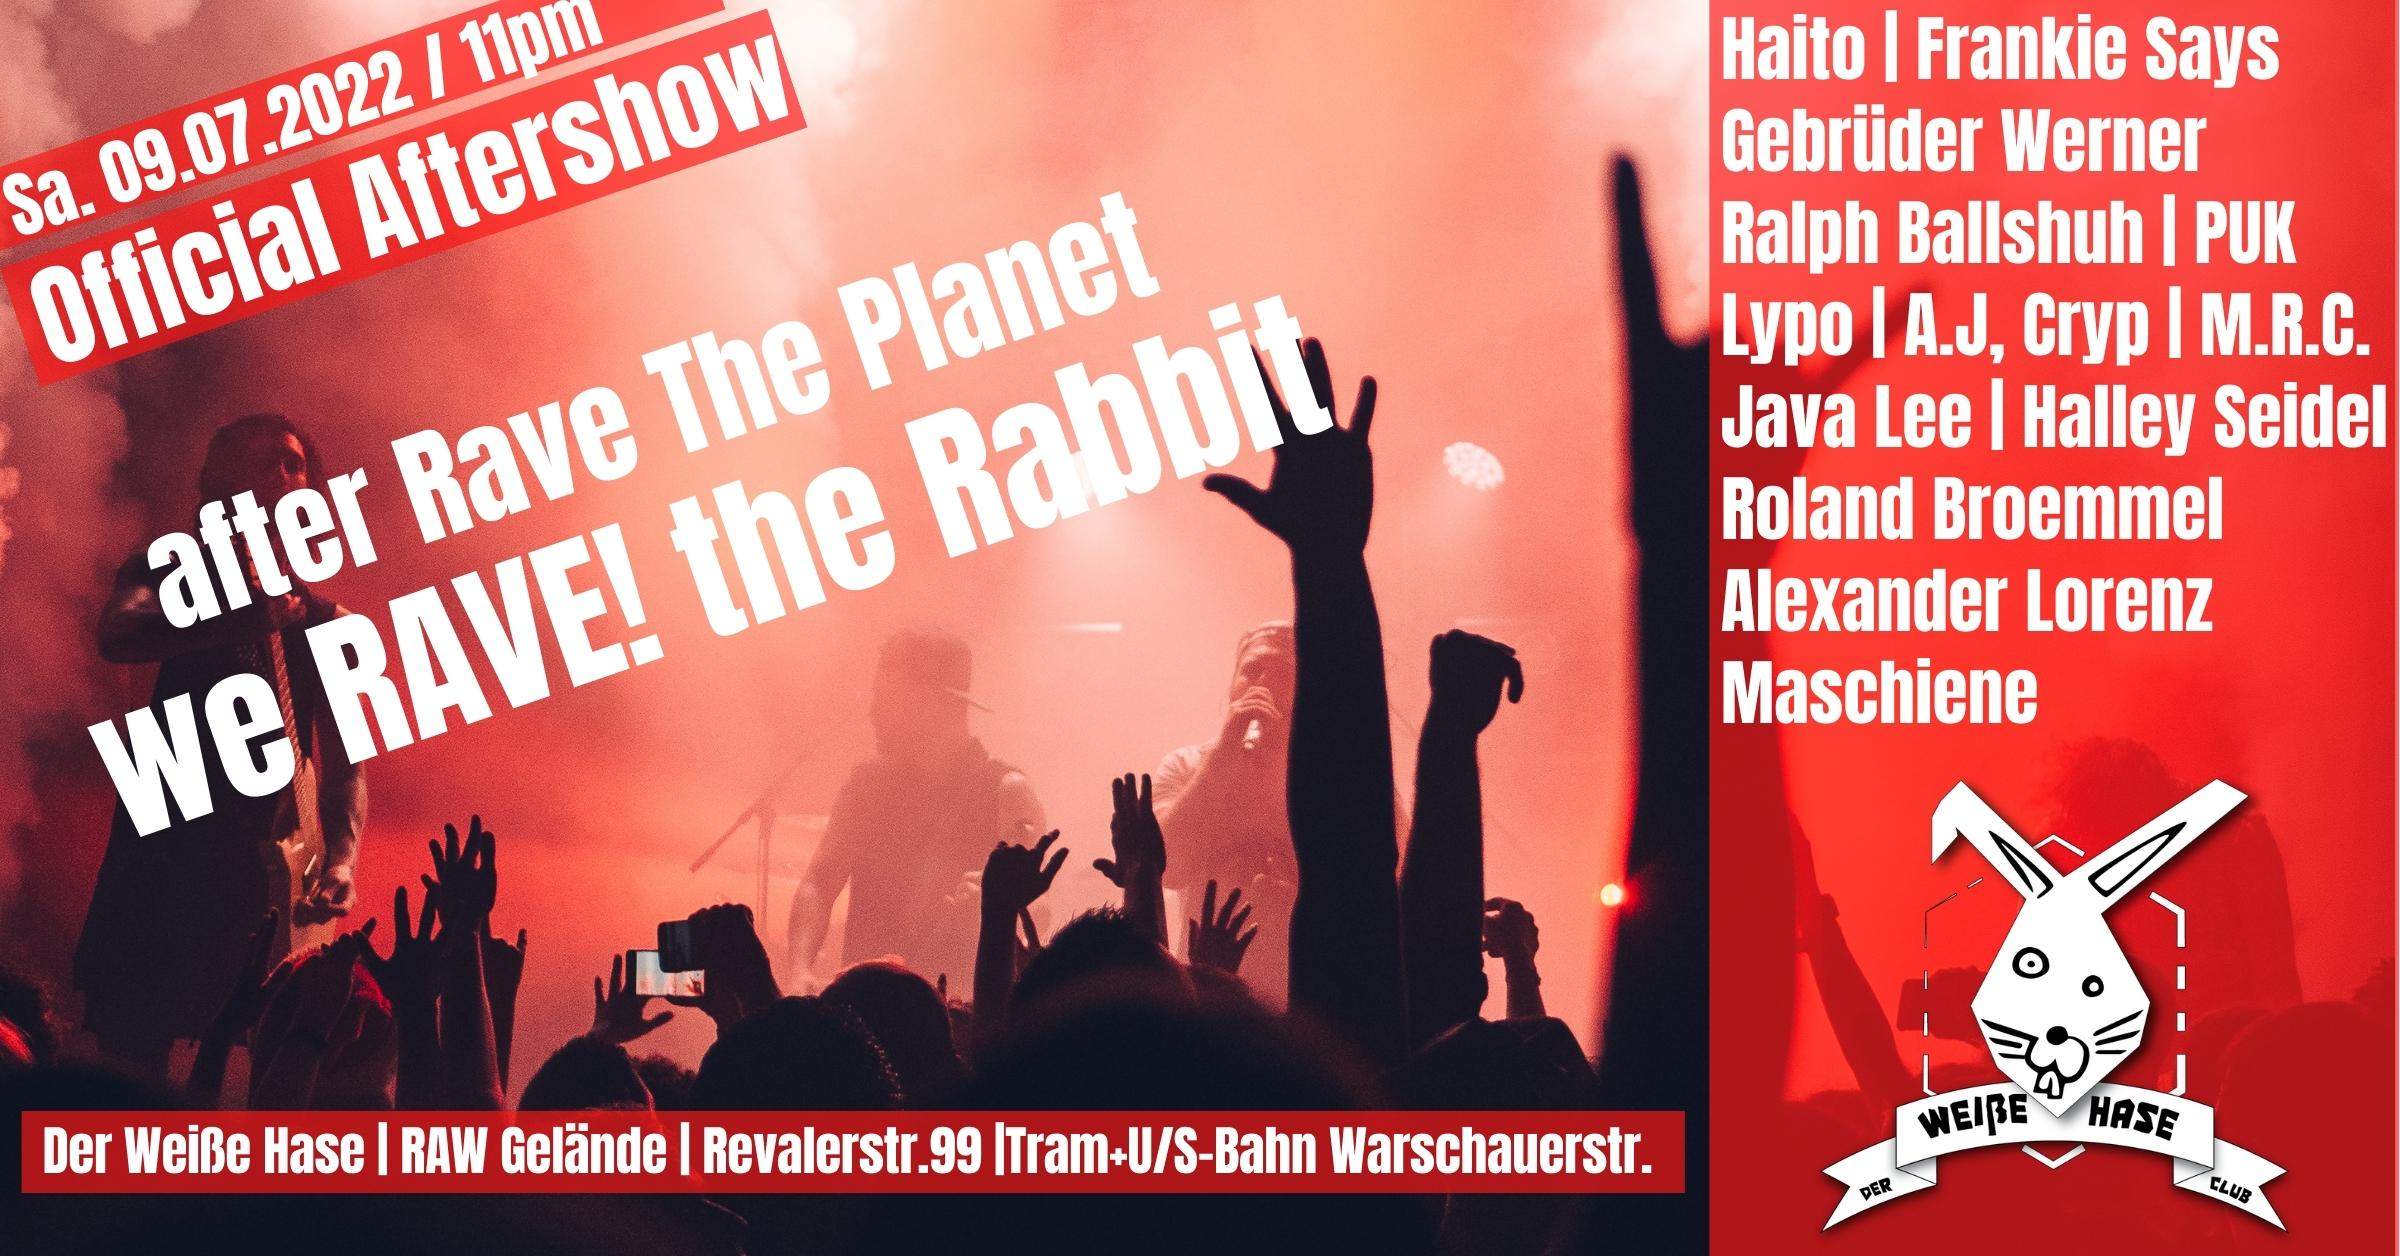 after Rave the Planet / we RAVE the Rabbit / together Again - Página frontal